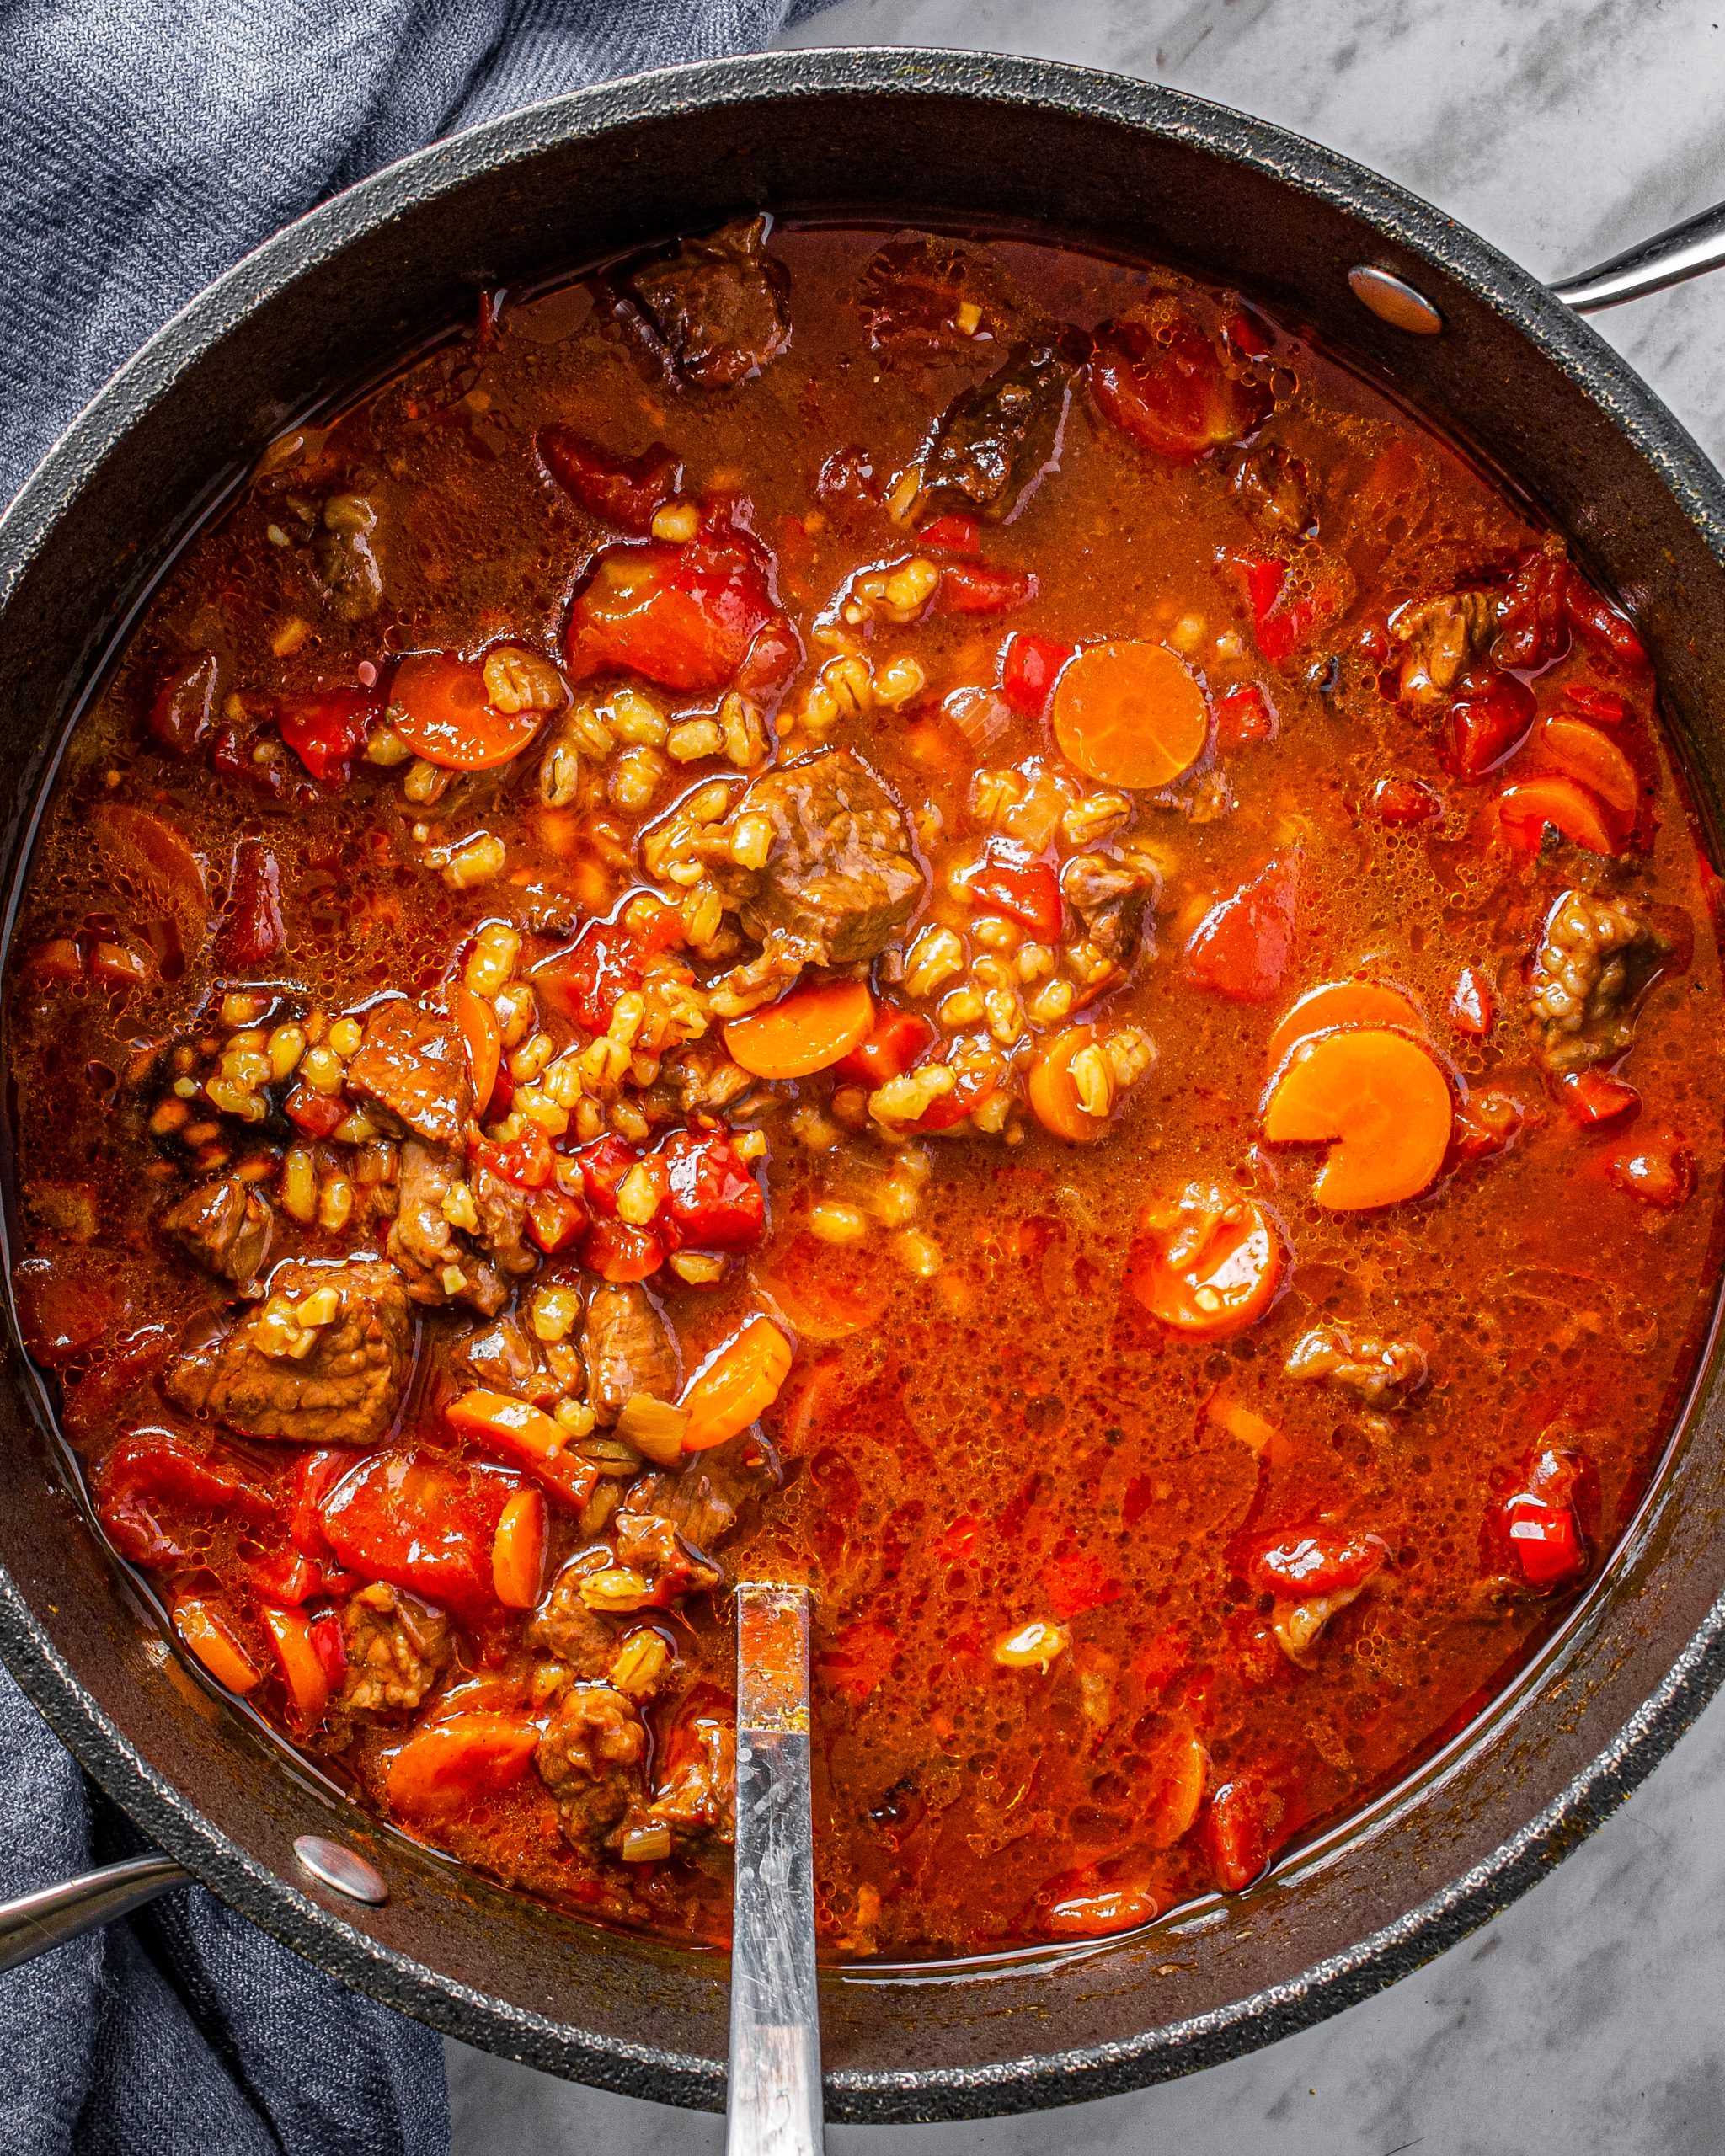 Lower the heat to a simmer and cover, cooking for 50-60 minutes.